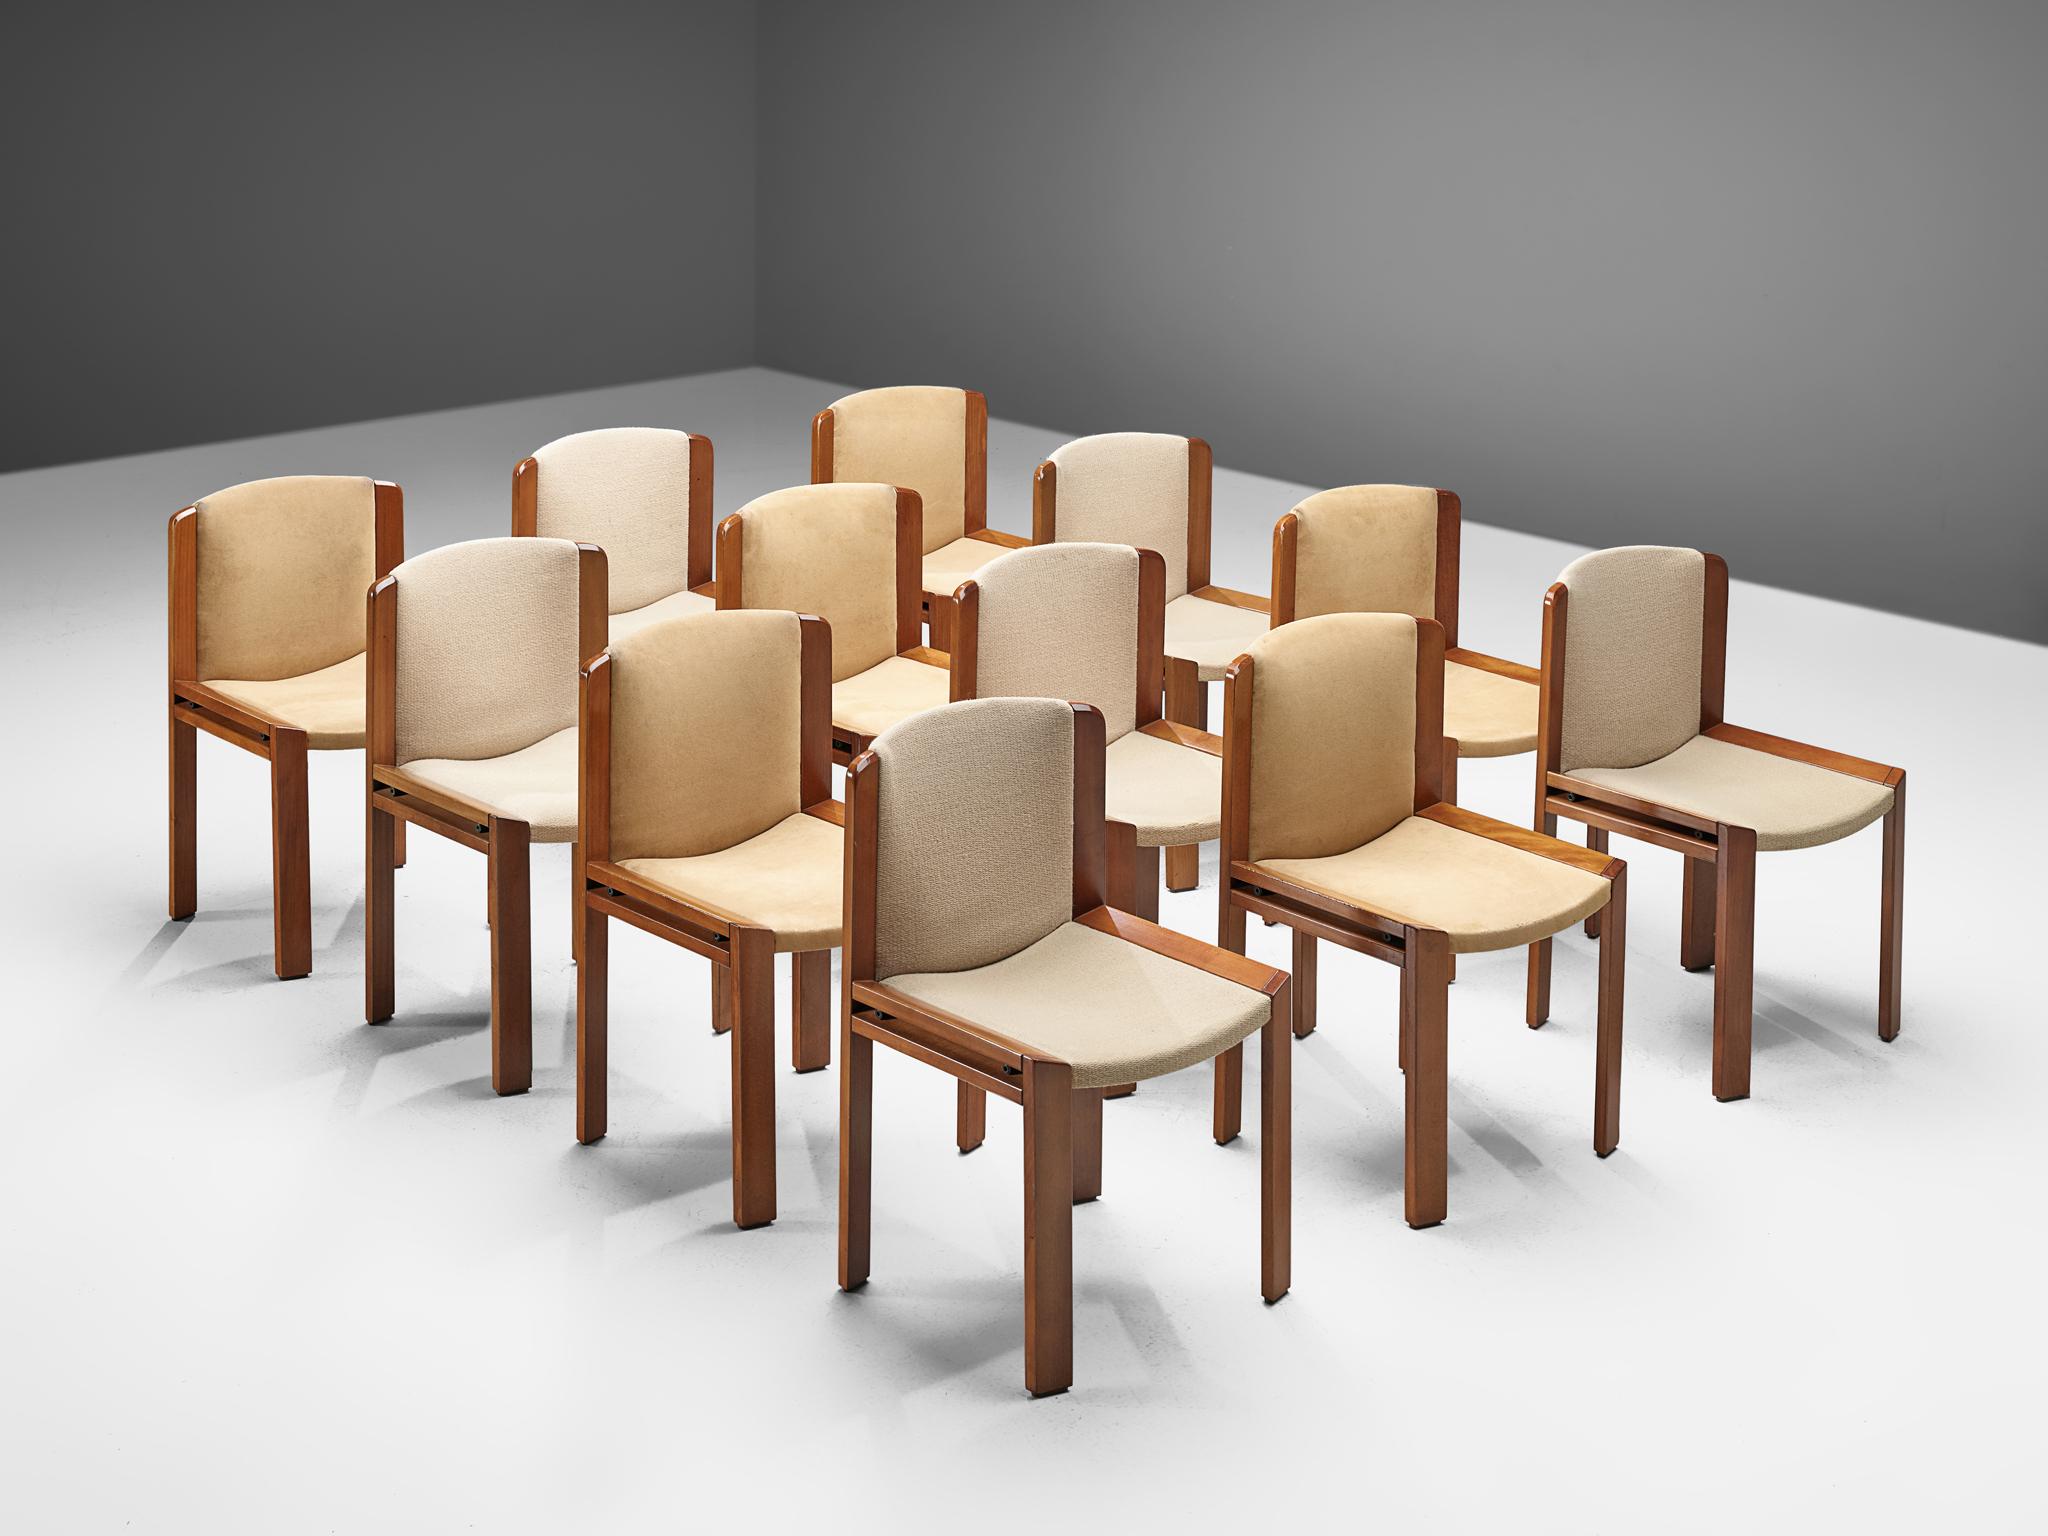 Joe Colombo for Pozzi, set of 12 dining chairs model '300', suede and beech, Italy, 1966.

Functionalist set of dining chairs is designed by Joe Colombo in 1966. His fascination with functionality meant he always focused on the user, which lead him